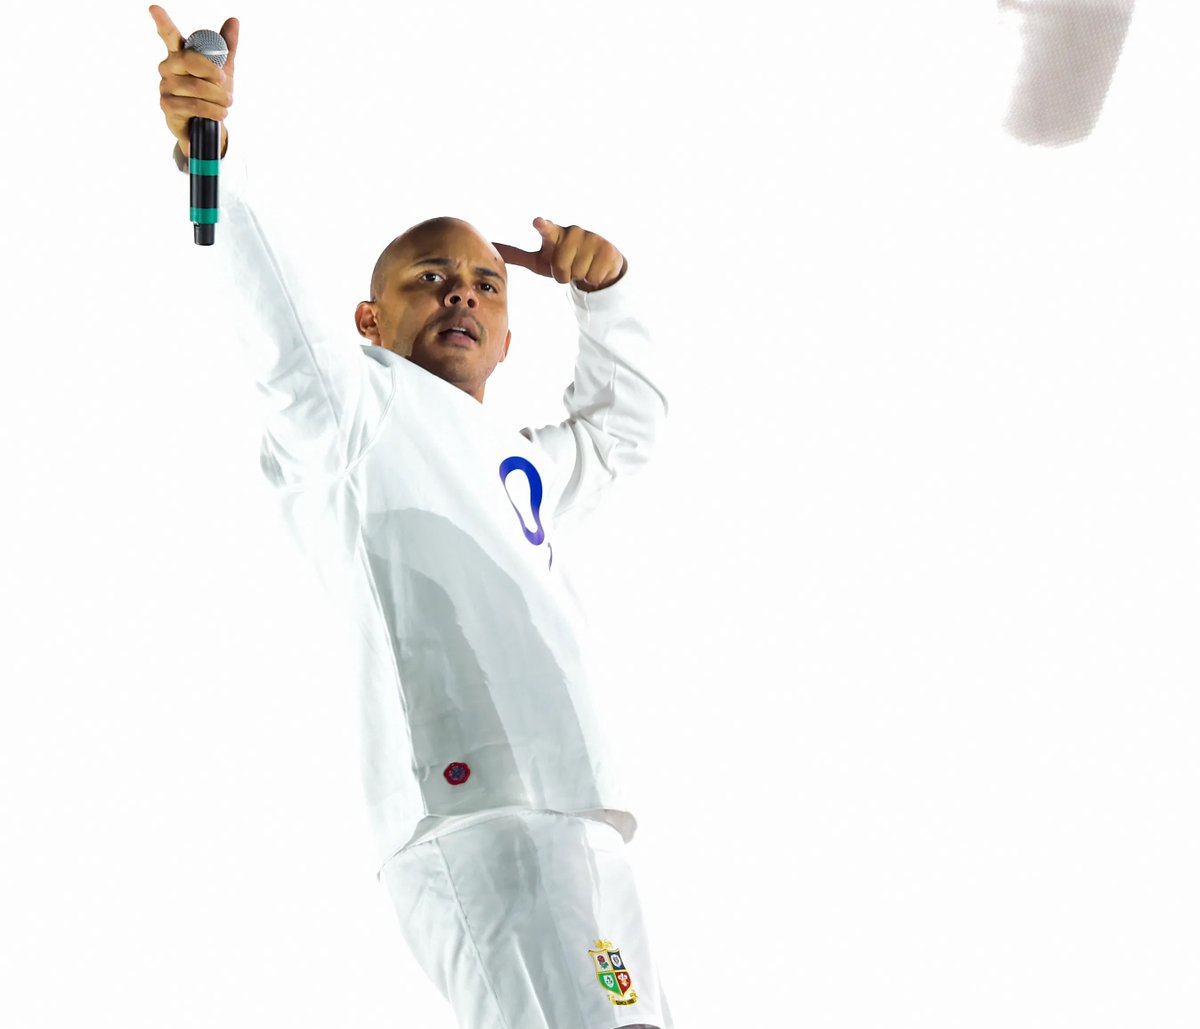 All three members of Major Lazer pairing long sleeve England classic jerseys with Lions shorts in what is best described as a 'bold choice' at Glastonbury in 2017